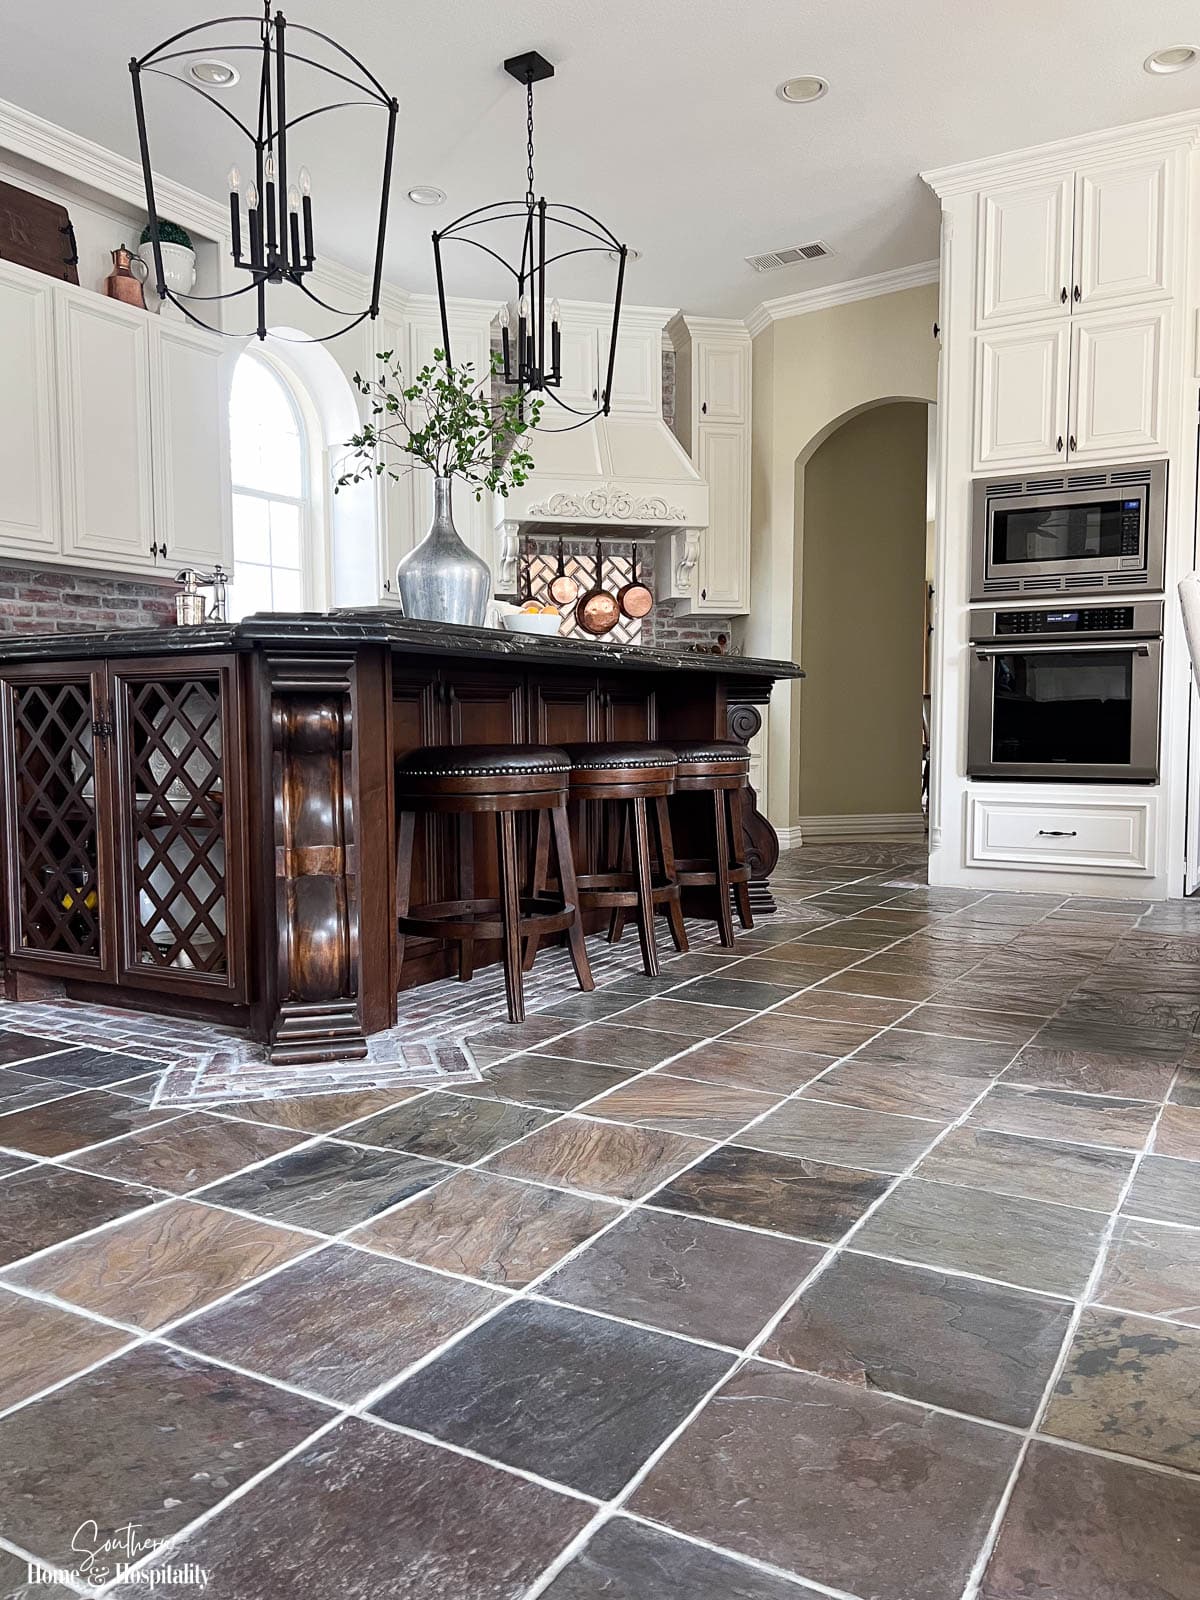 The Best Tips I’ve Learned to Clean Rough Slate Floors